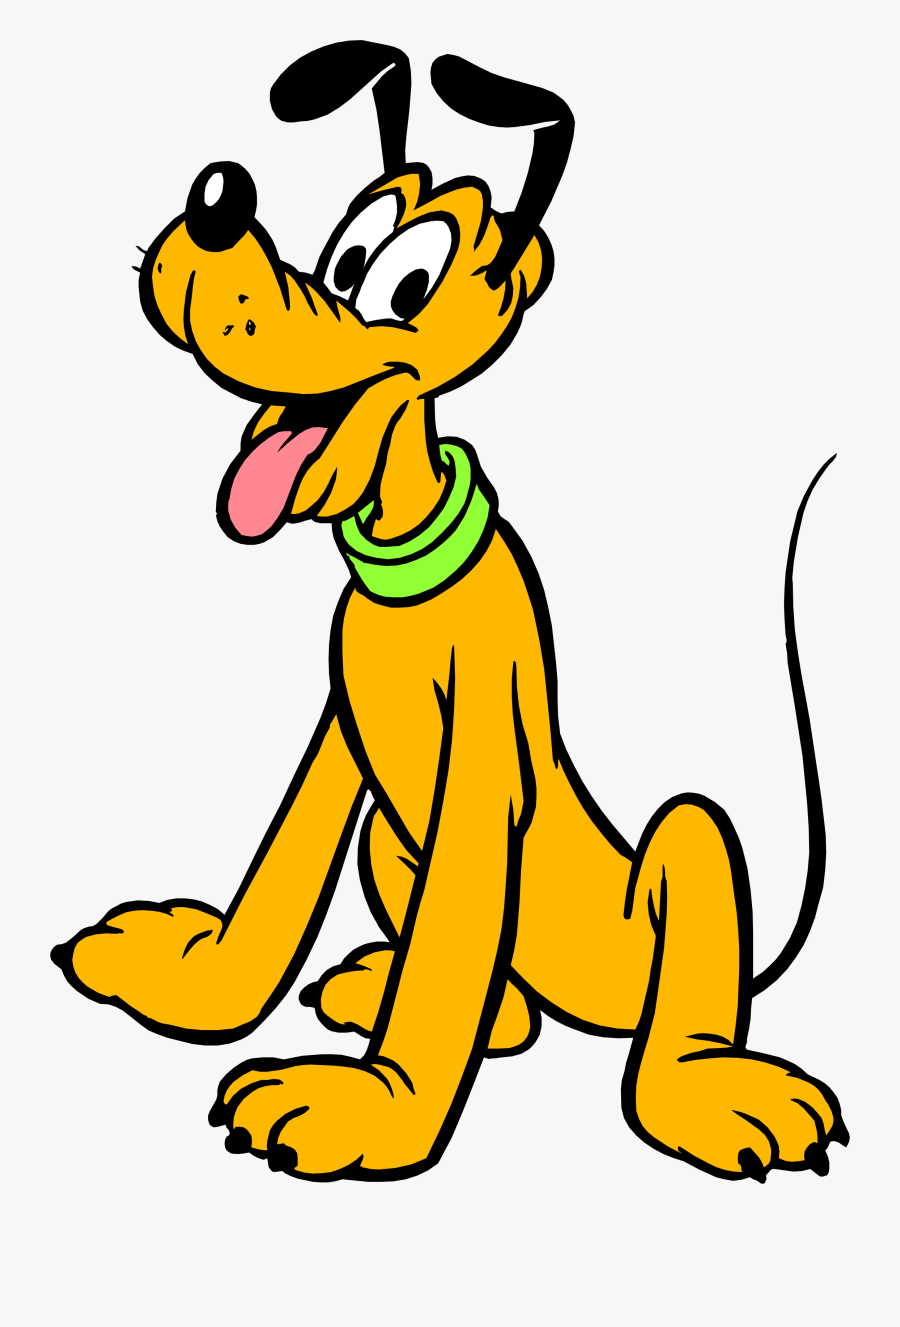 Download Pluto Png Photo For Designing Project - Pluto Off Mickey Mouse, Transparent Clipart